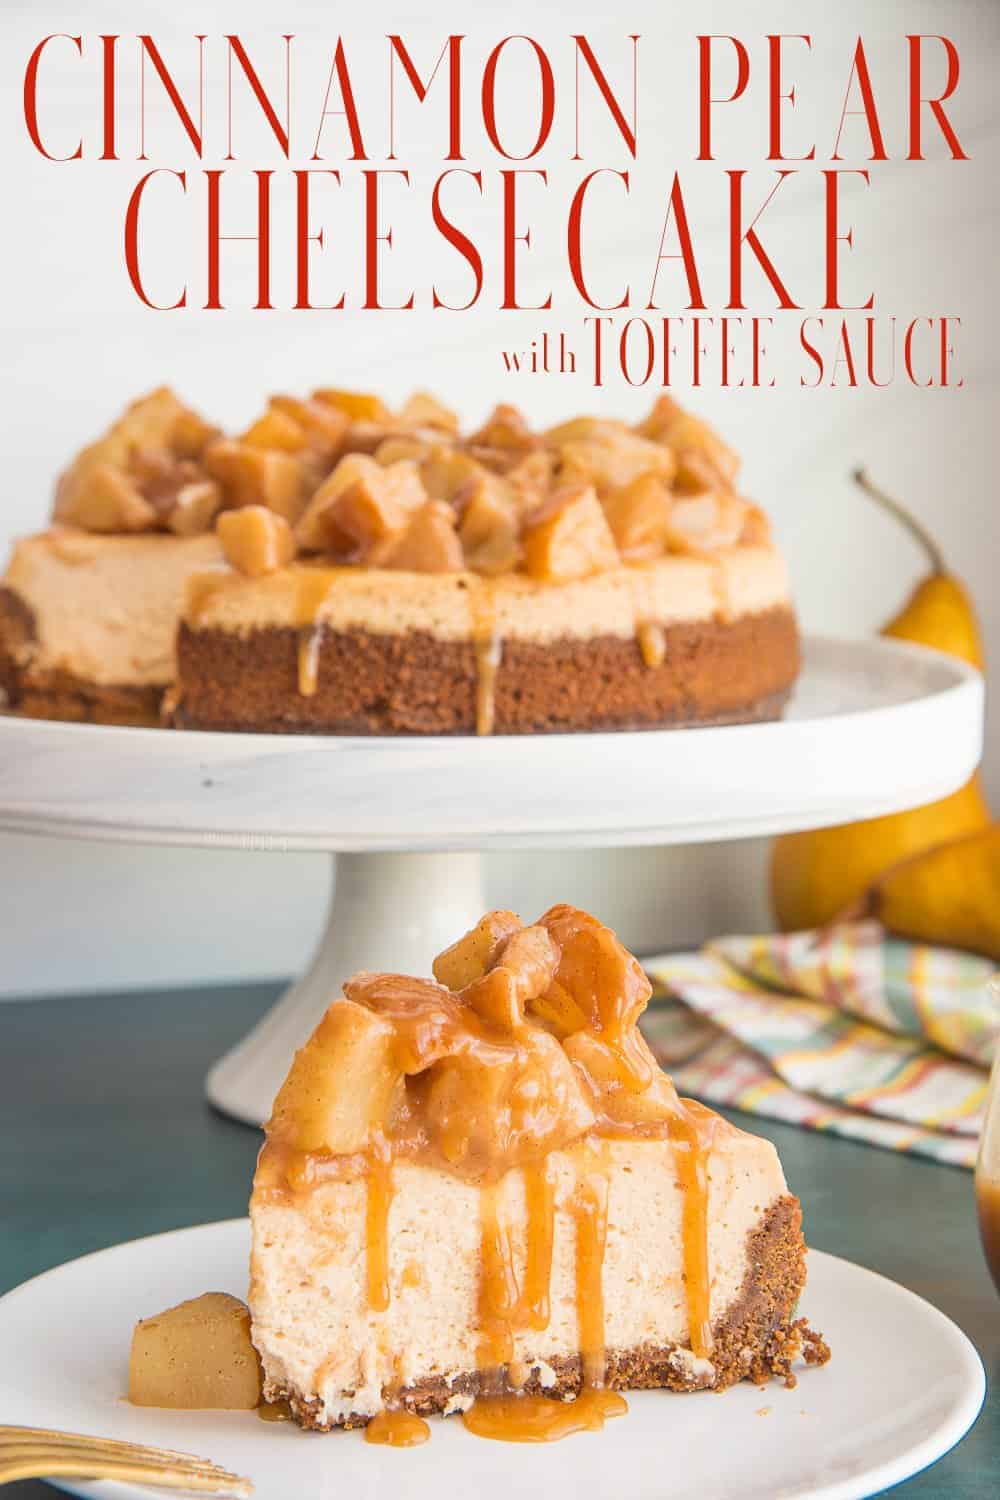 Cinnamon Pear Cheesecake has a gingersnap crust that holds a warmly spiced cheesecake batter. Its fresh pear topping adds even more lovely spice flavors. It taste great with my Spiced Toffee Sauce, but just as good without it. #cinnamoncheesecake #pearcheesecake #bakingwithpears #boscpearrecipe #cheesecakerecipe #toffeesauce #dessert #gingersnaprecipe #sweets #cheesecake  via @ediblesense